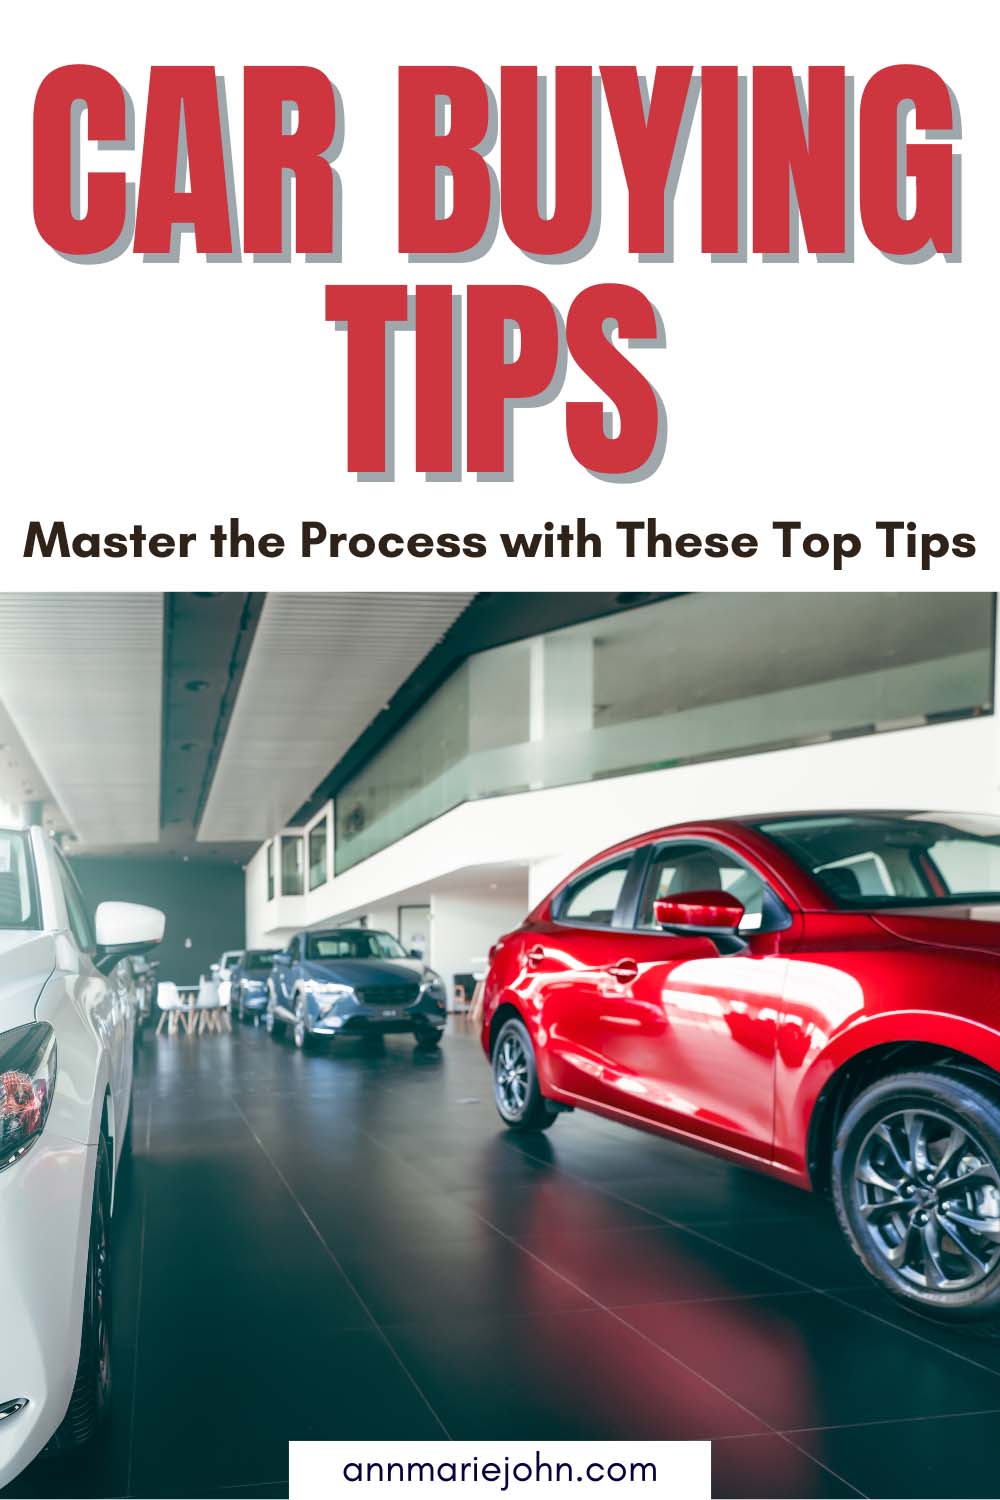 Car Buying Tips: Master the Process with These Top Tips